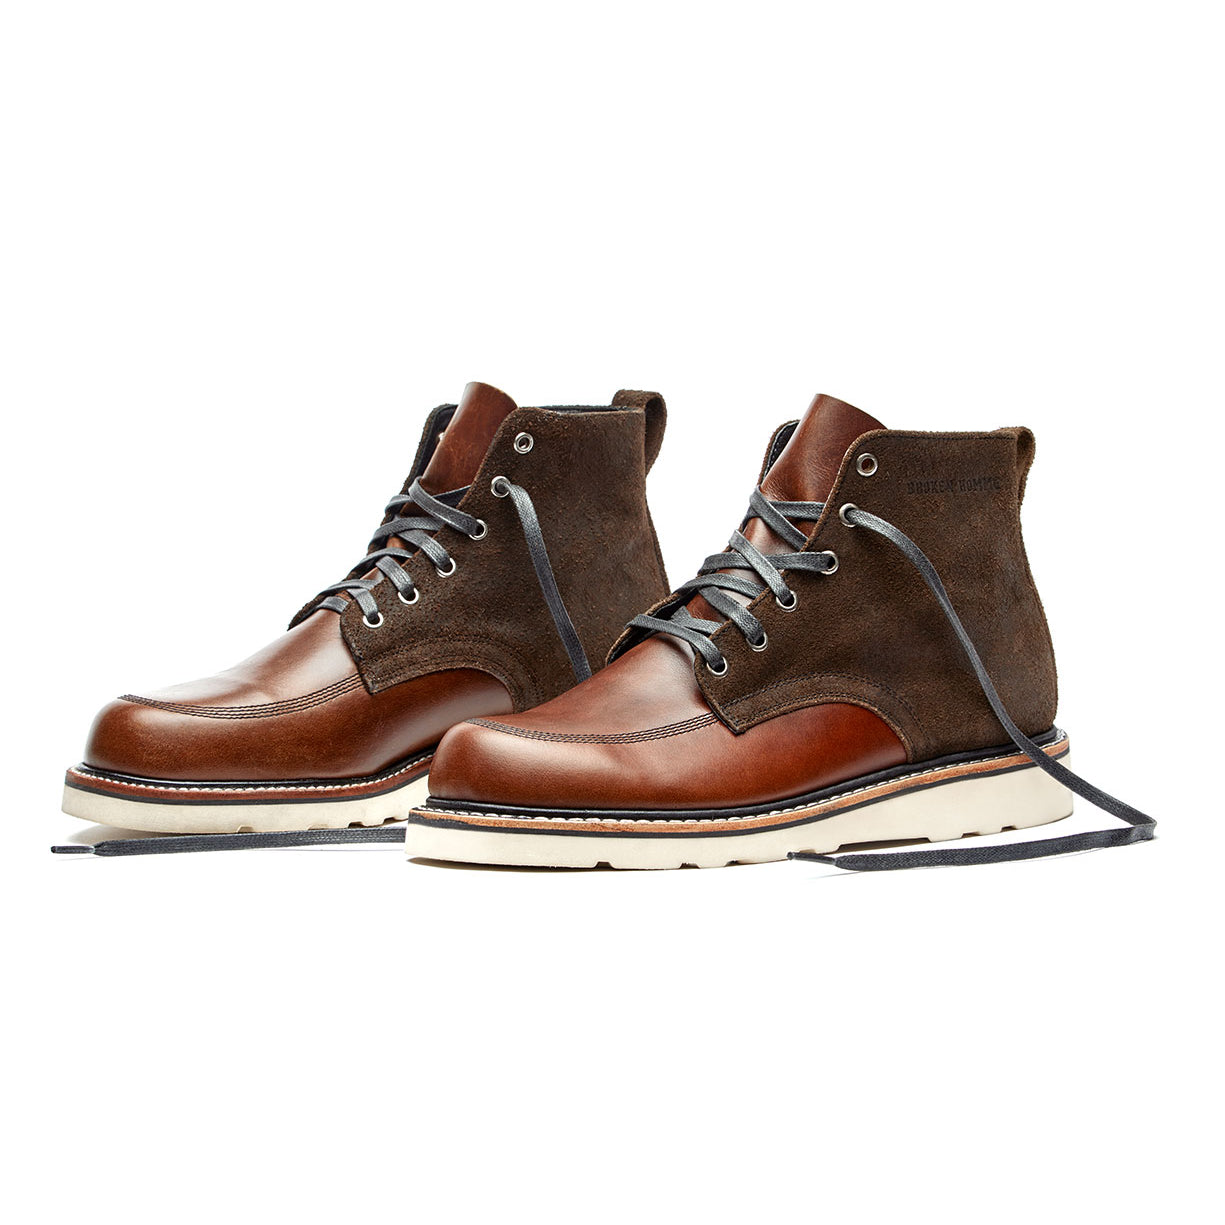 A comfortable fit pair of Broken Homme Jaime Boots, in a combination of brown and tan colors, placed on a white background.